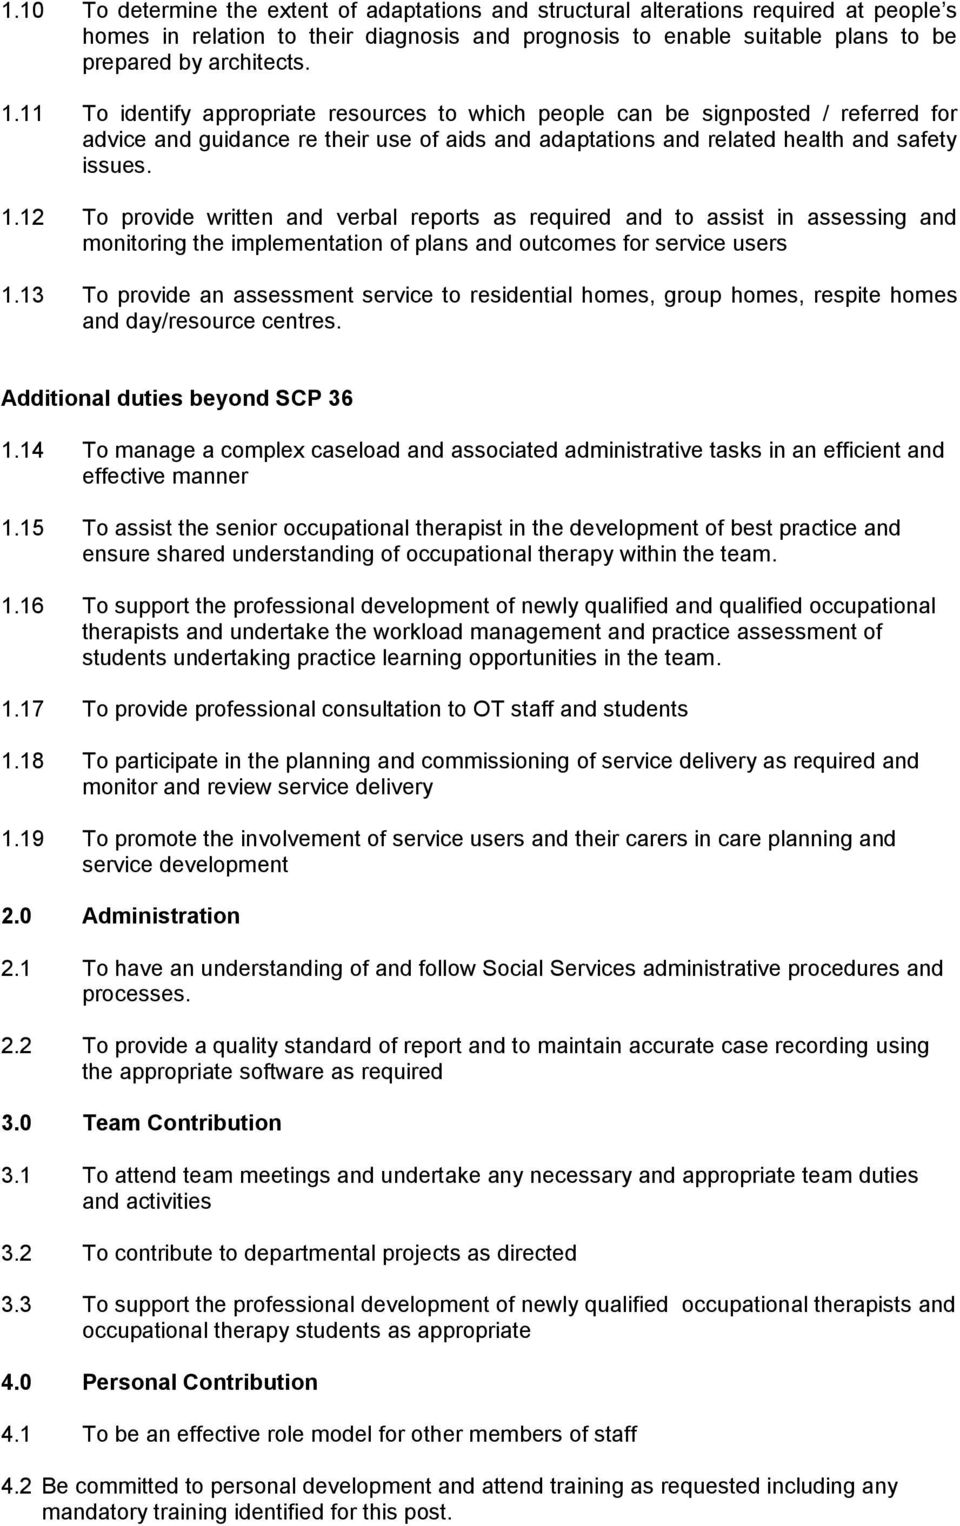 12 To provide written and verbal reports as required and to assist in assessing and monitoring the implementation of plans and outcomes for service users 1.